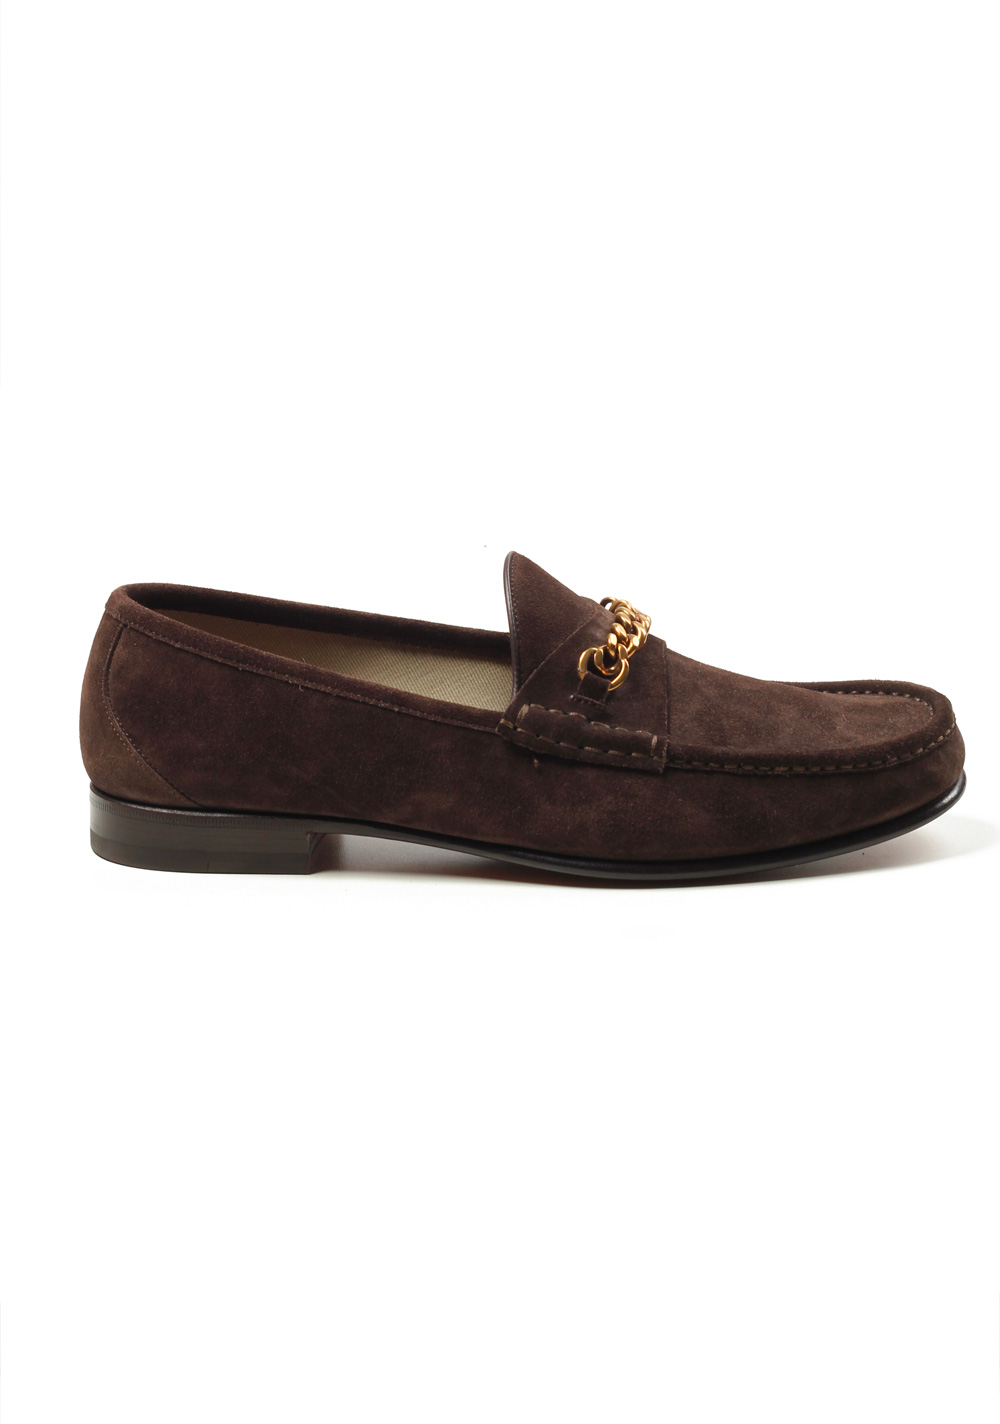 TOM FORD York Brown Suede Chain Loafers Shoes Size 11 UK / 12 U.S. | Costume Limité